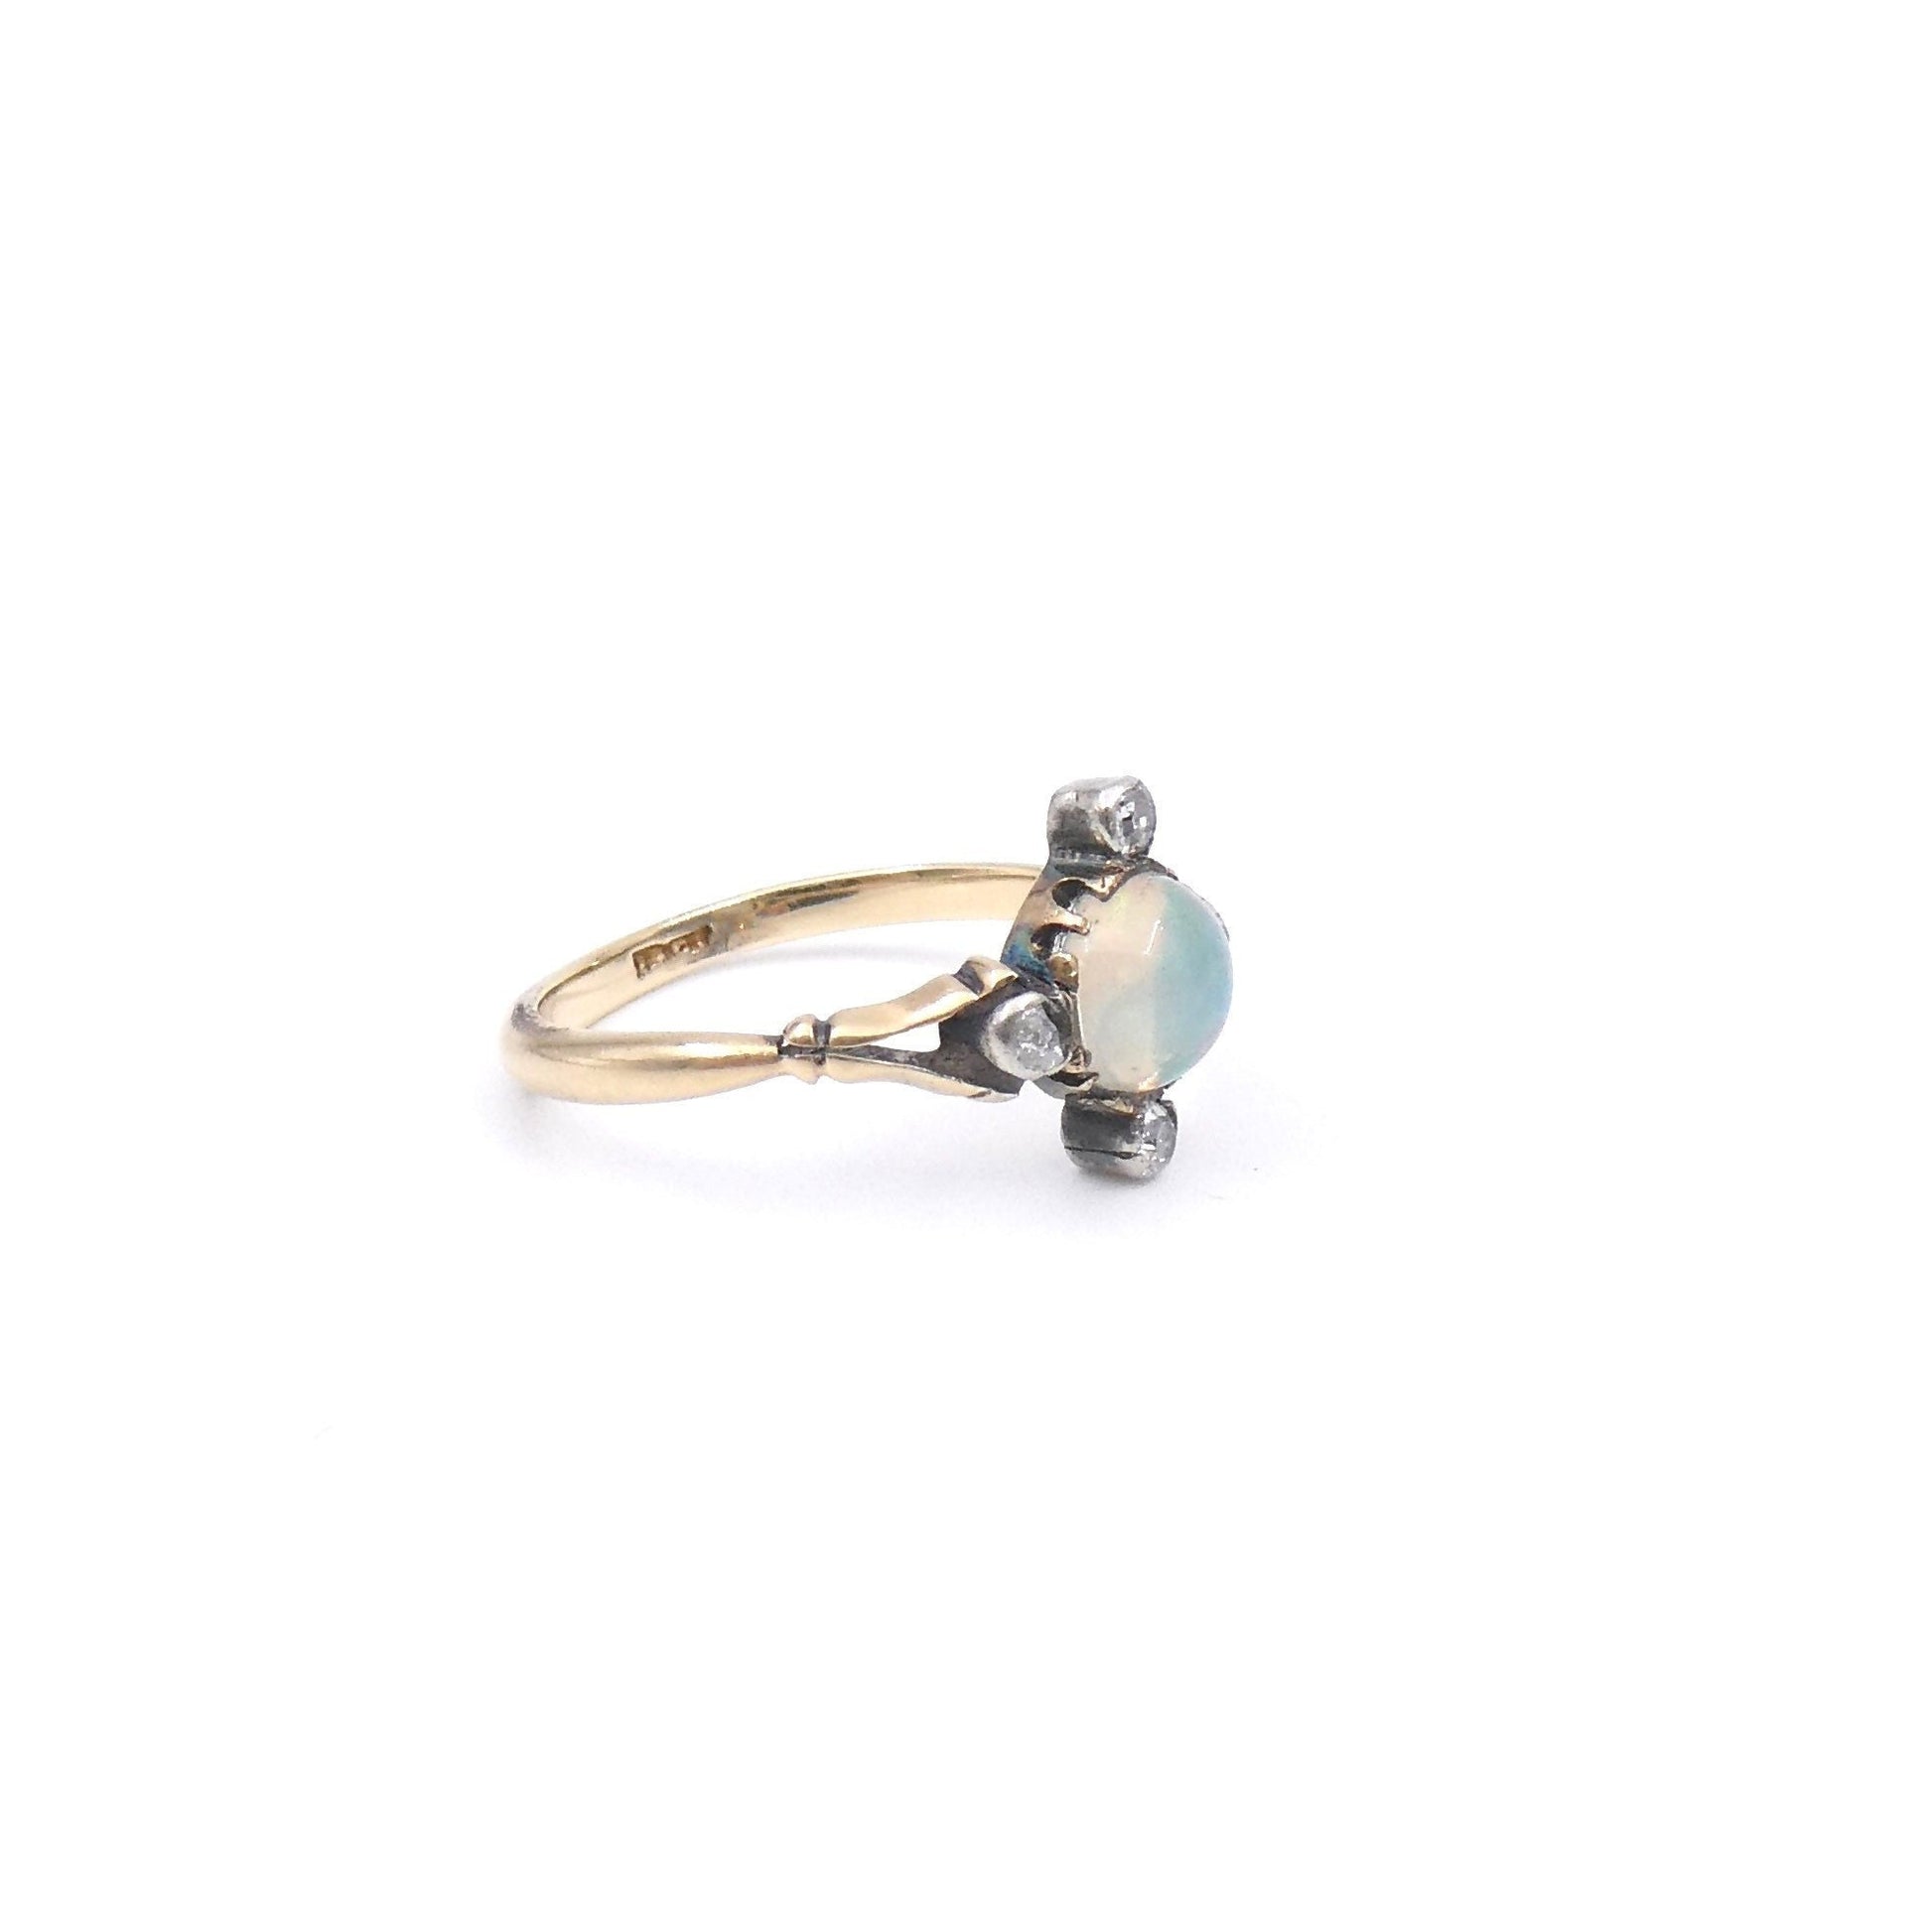 Antique opal and diamond ring, set with an iridescent opal and old cut diamonds. - Collected